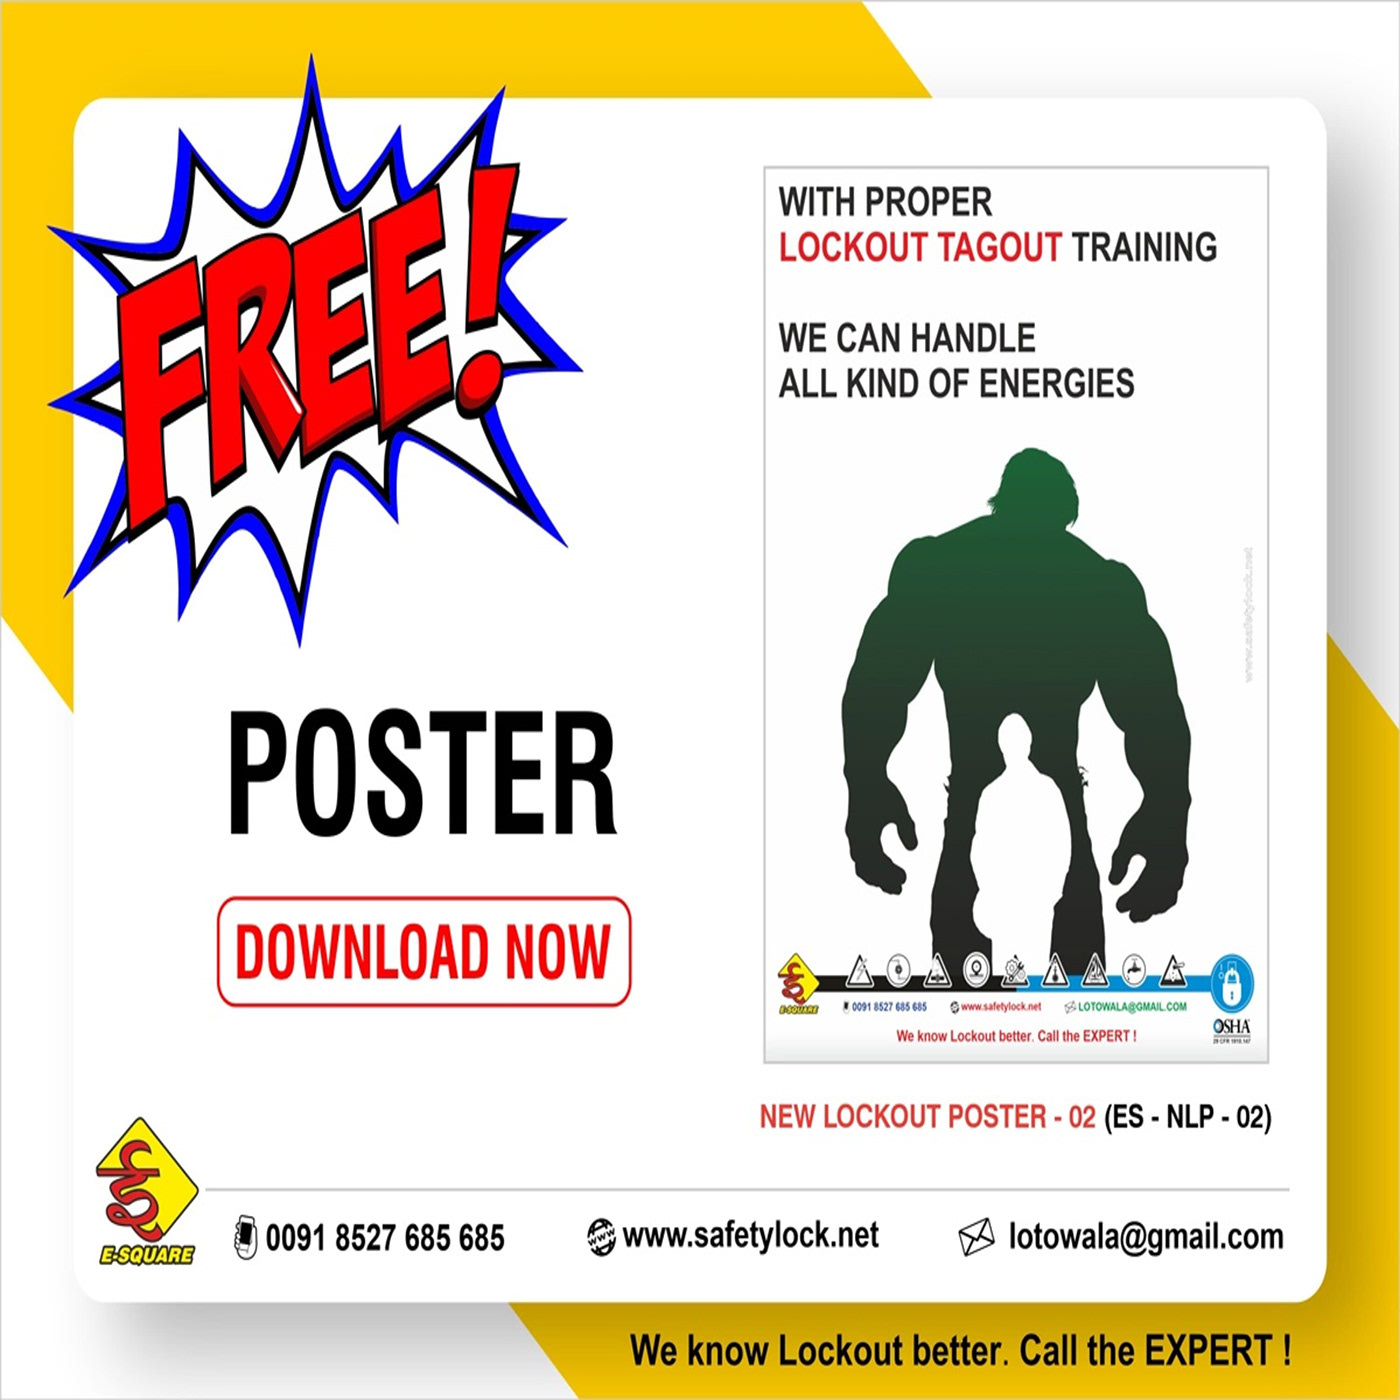 Lockout Tagout Poster - With proper Lockout Tagout Training, we can handle all kind of Energies
